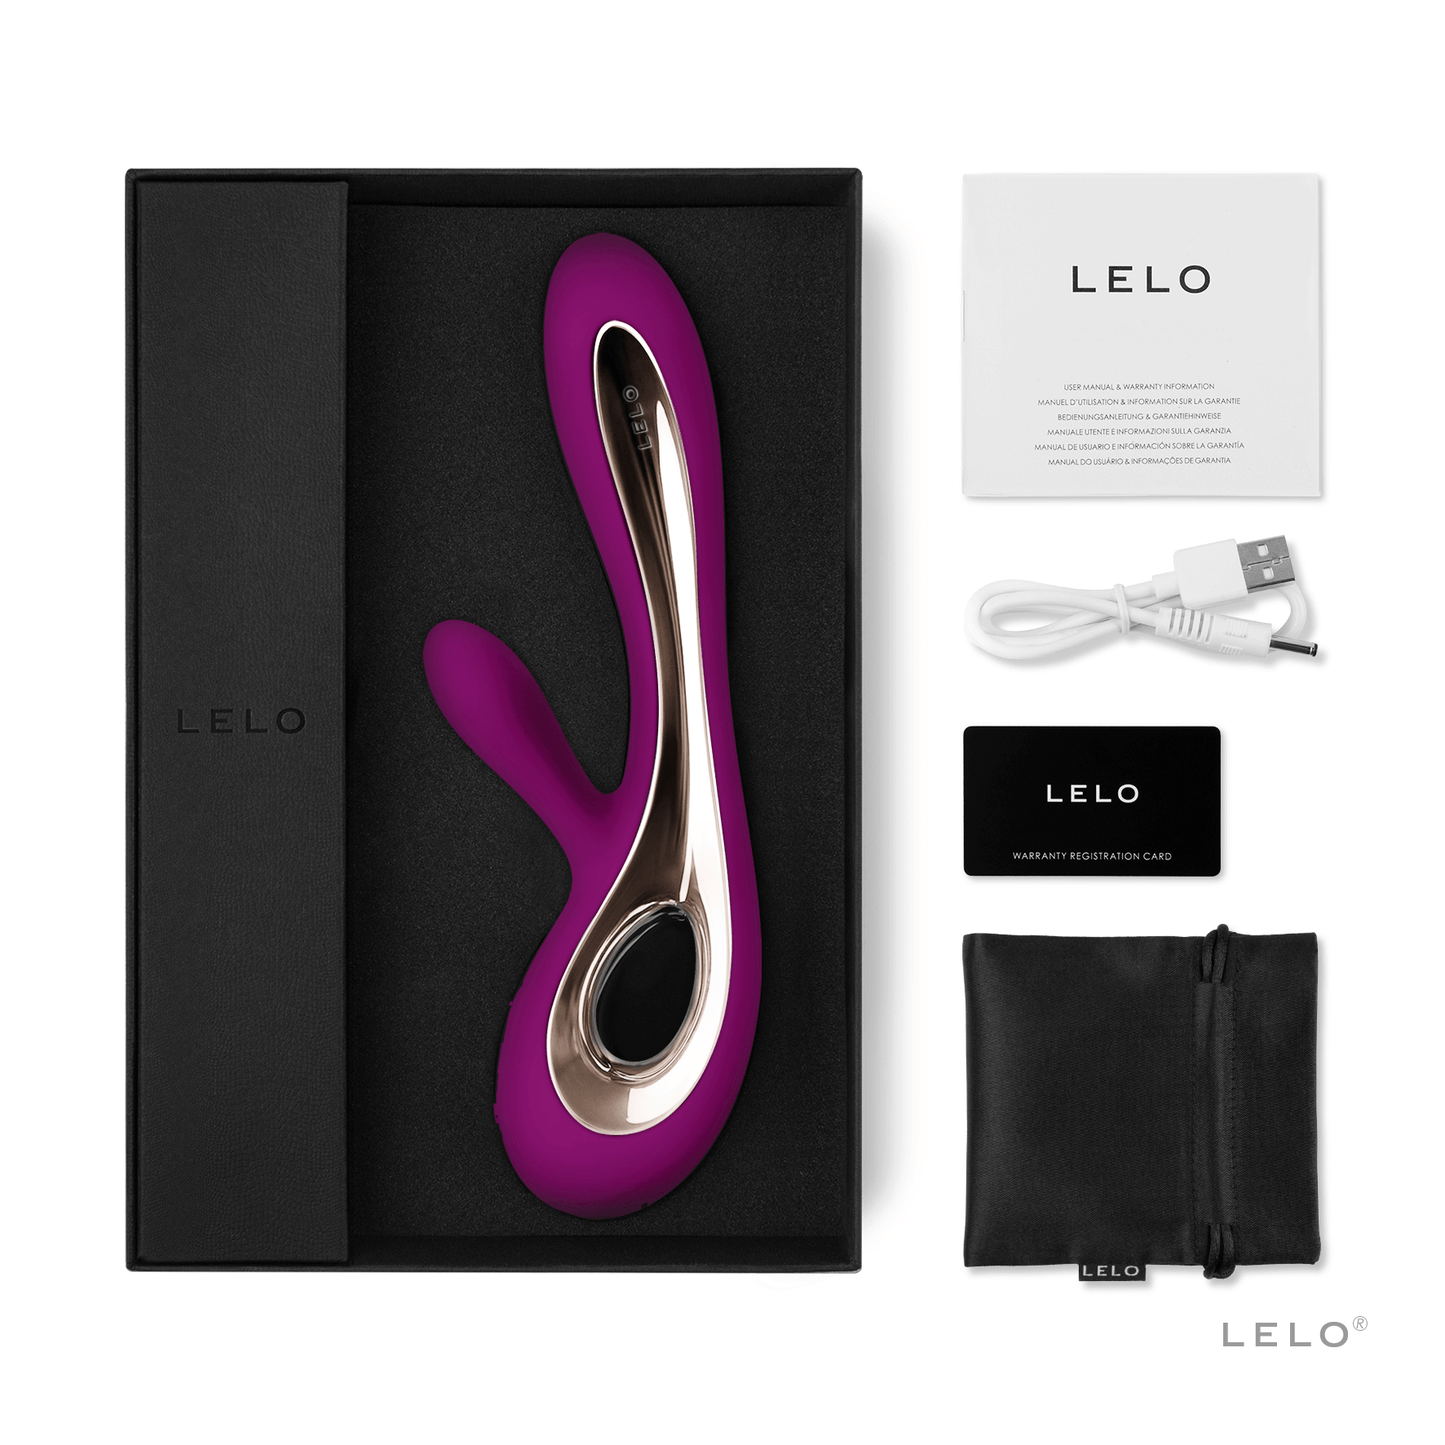 Lelo Soraya 2 - Deep Rose - by The Bigger O  - an online sex toy shop. We ship to USA, Canada and the UK.